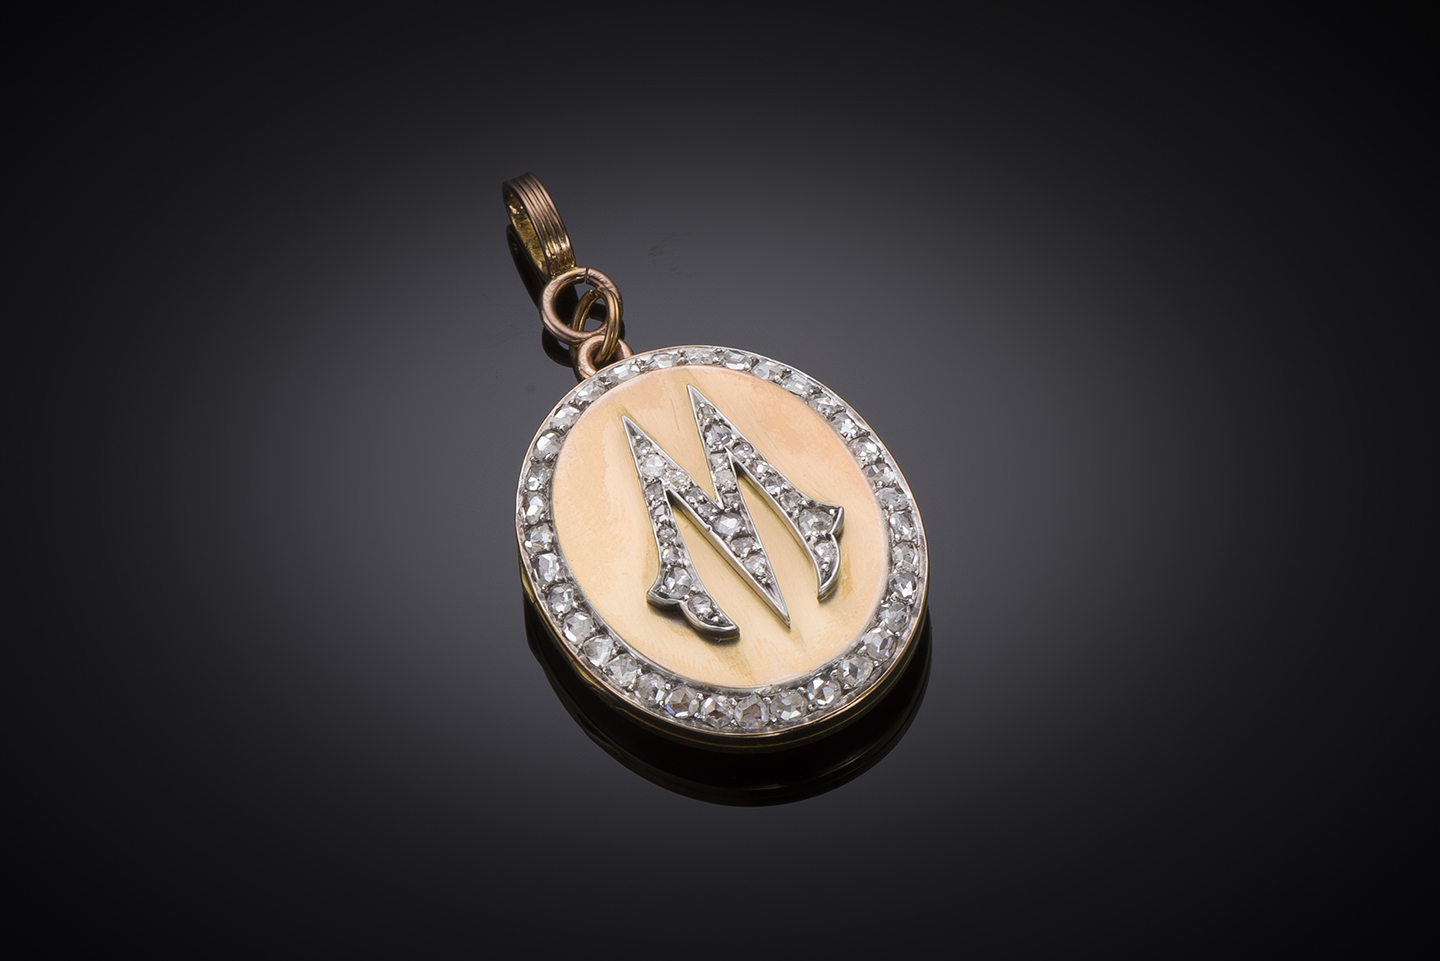 French diamond pendant with enamelled portrait (Deroche process). Sentiment jewel with letter M symbolizing love dated 1874.-1